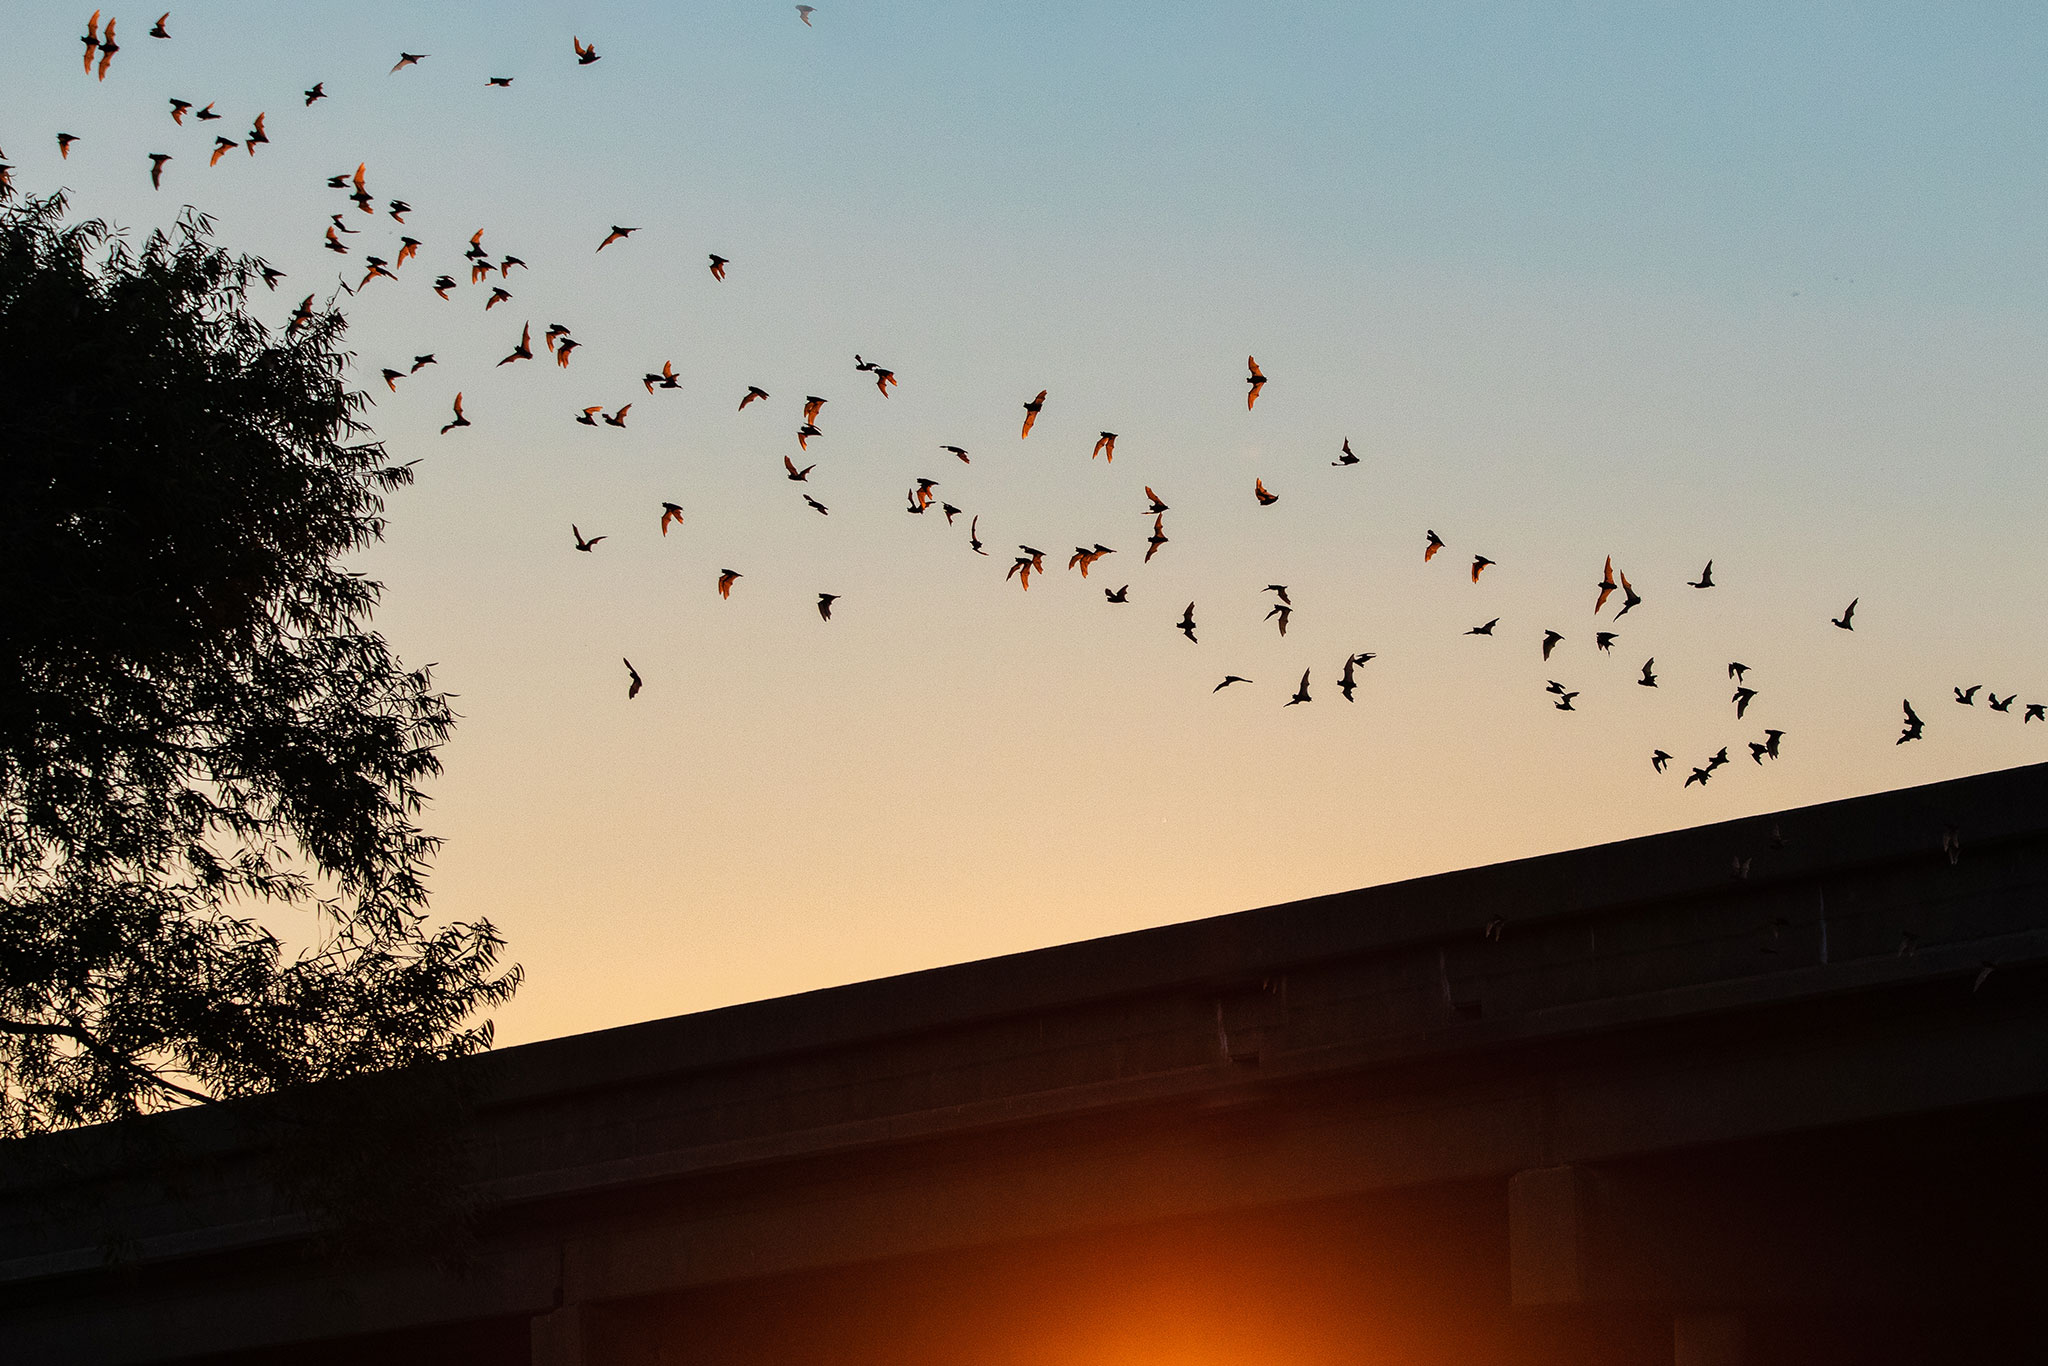 Several bats are seen flying over a roof line at sunset.